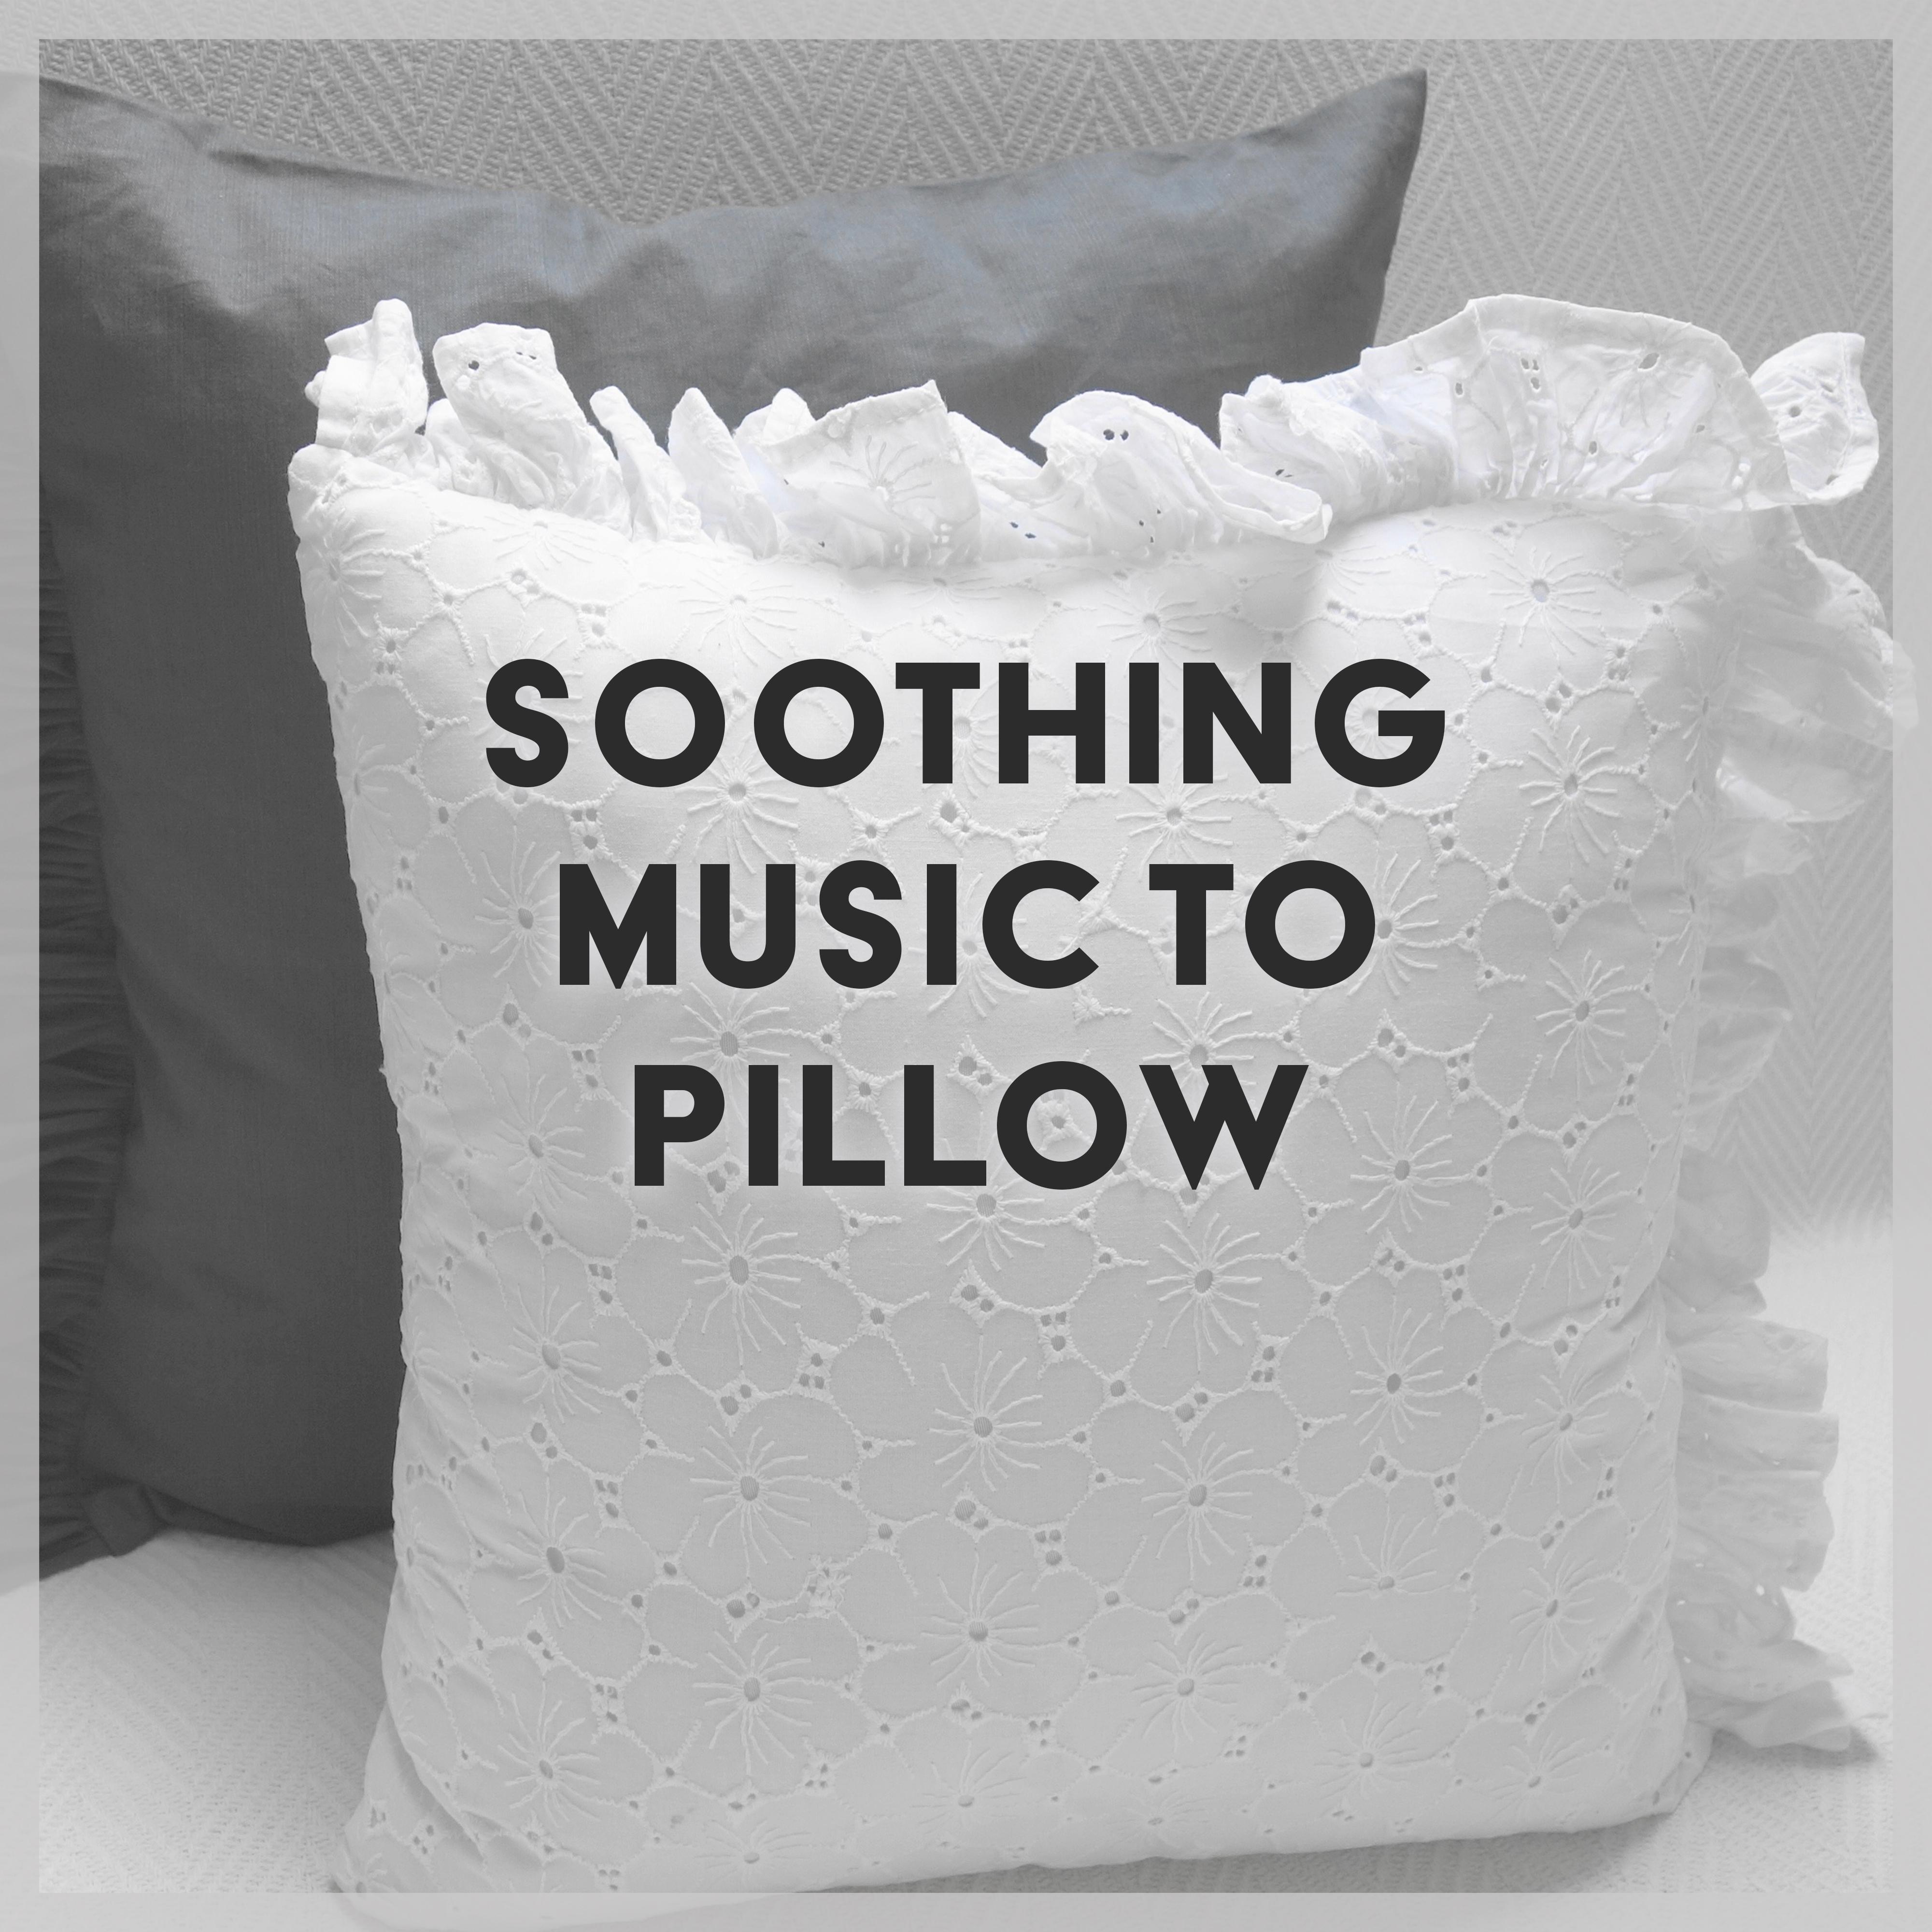 Soothing Music to Pillow – Deep Relief, Peaceful Lullabies, Night Sounds, Relaxation Bedtime, Pure Waves, Deep Sleep, Sweet Dreams